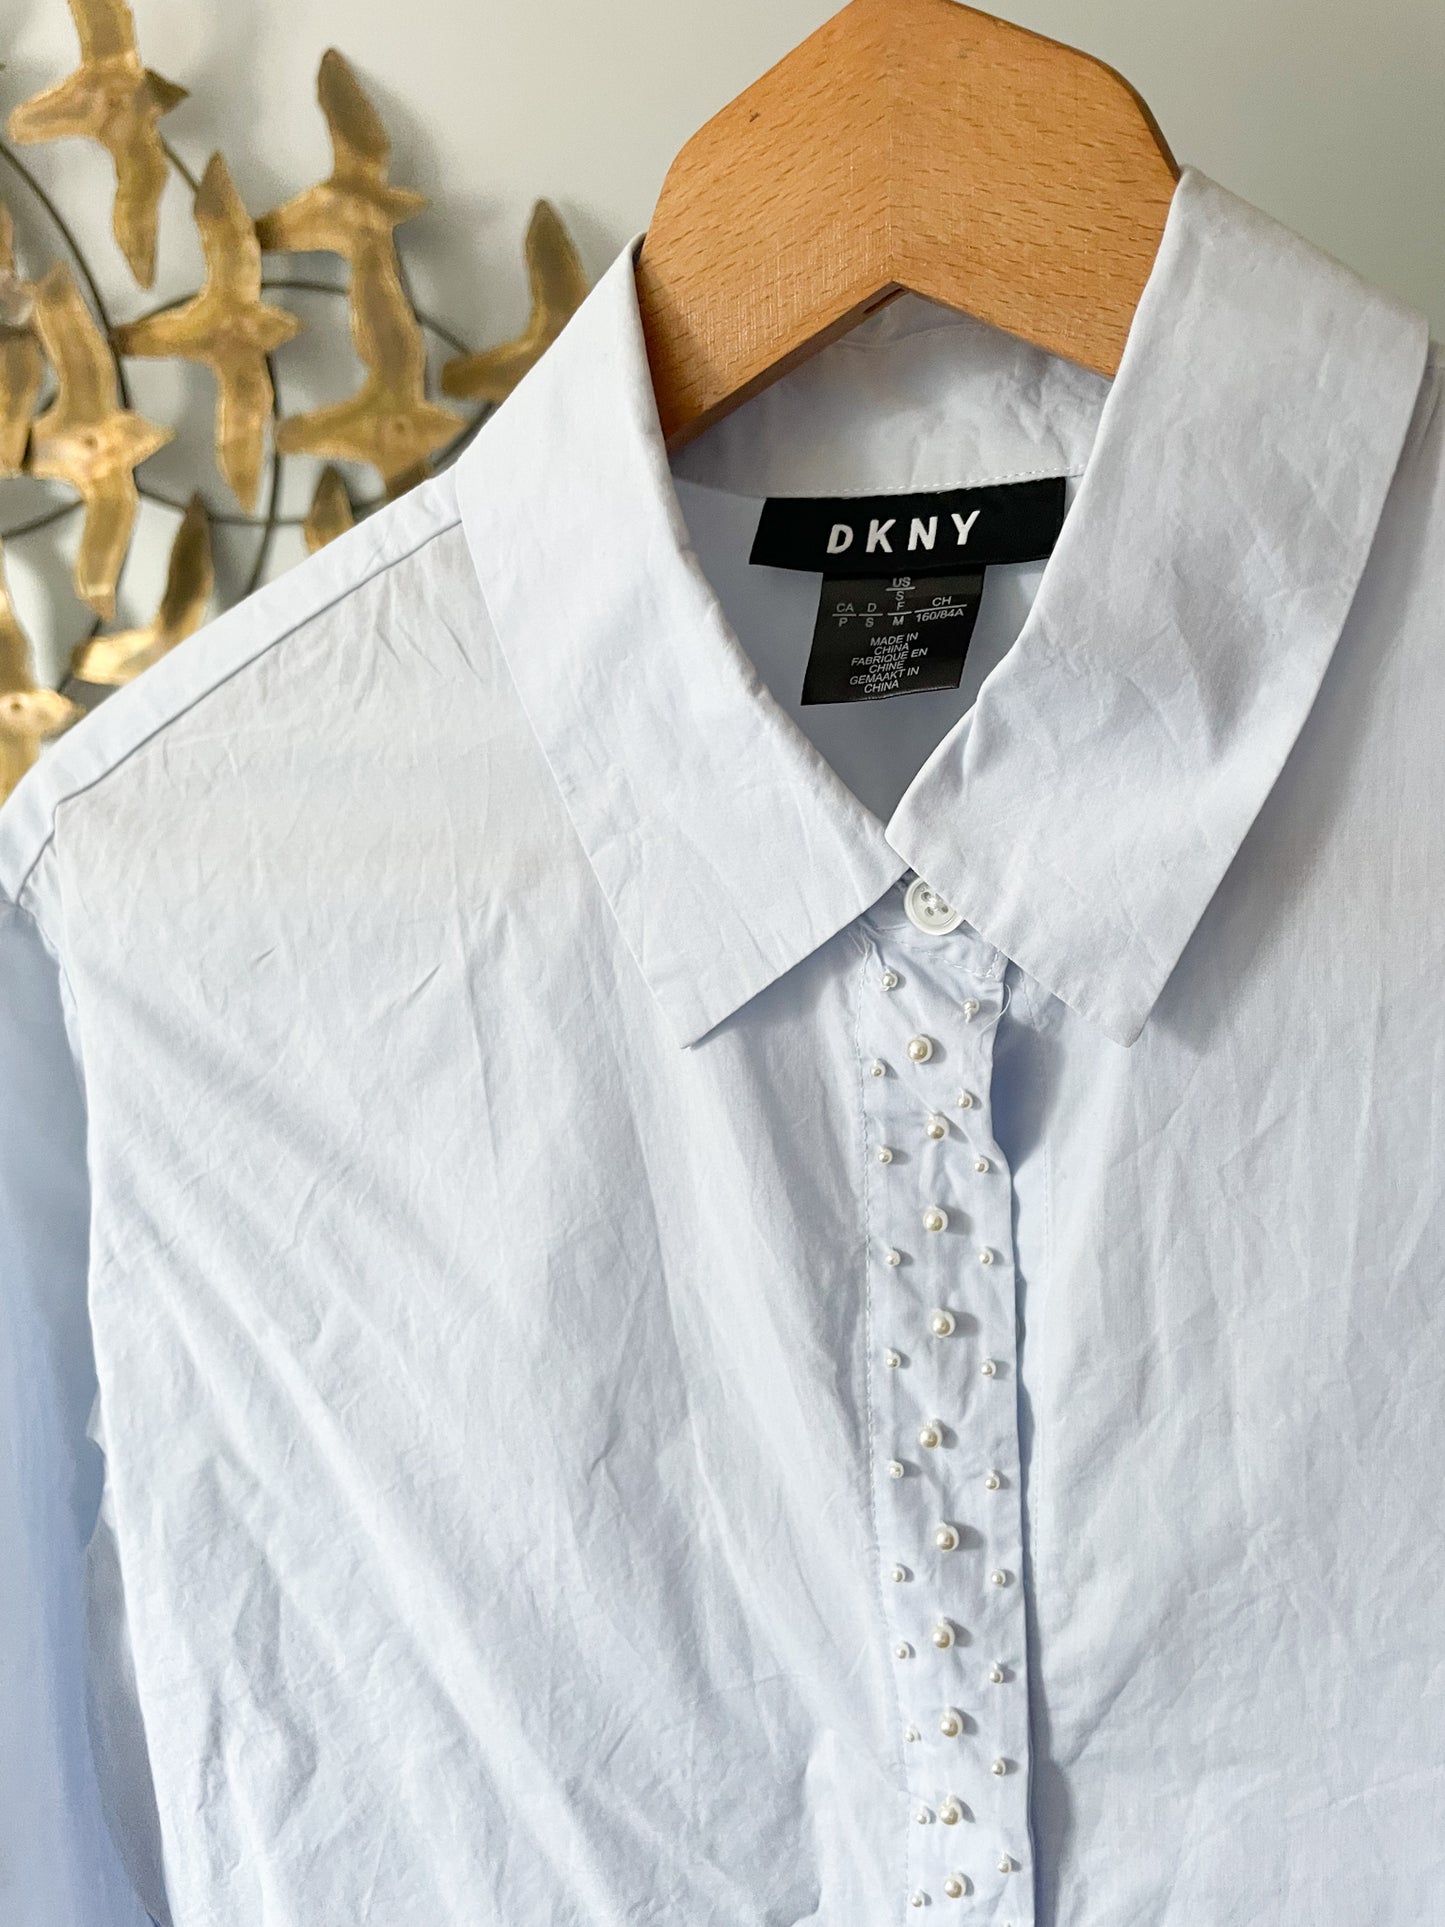 DKNY Light Blue Pinstripe Pearl Trimmed 100% Cotton Button Down Oxford Top - S/M